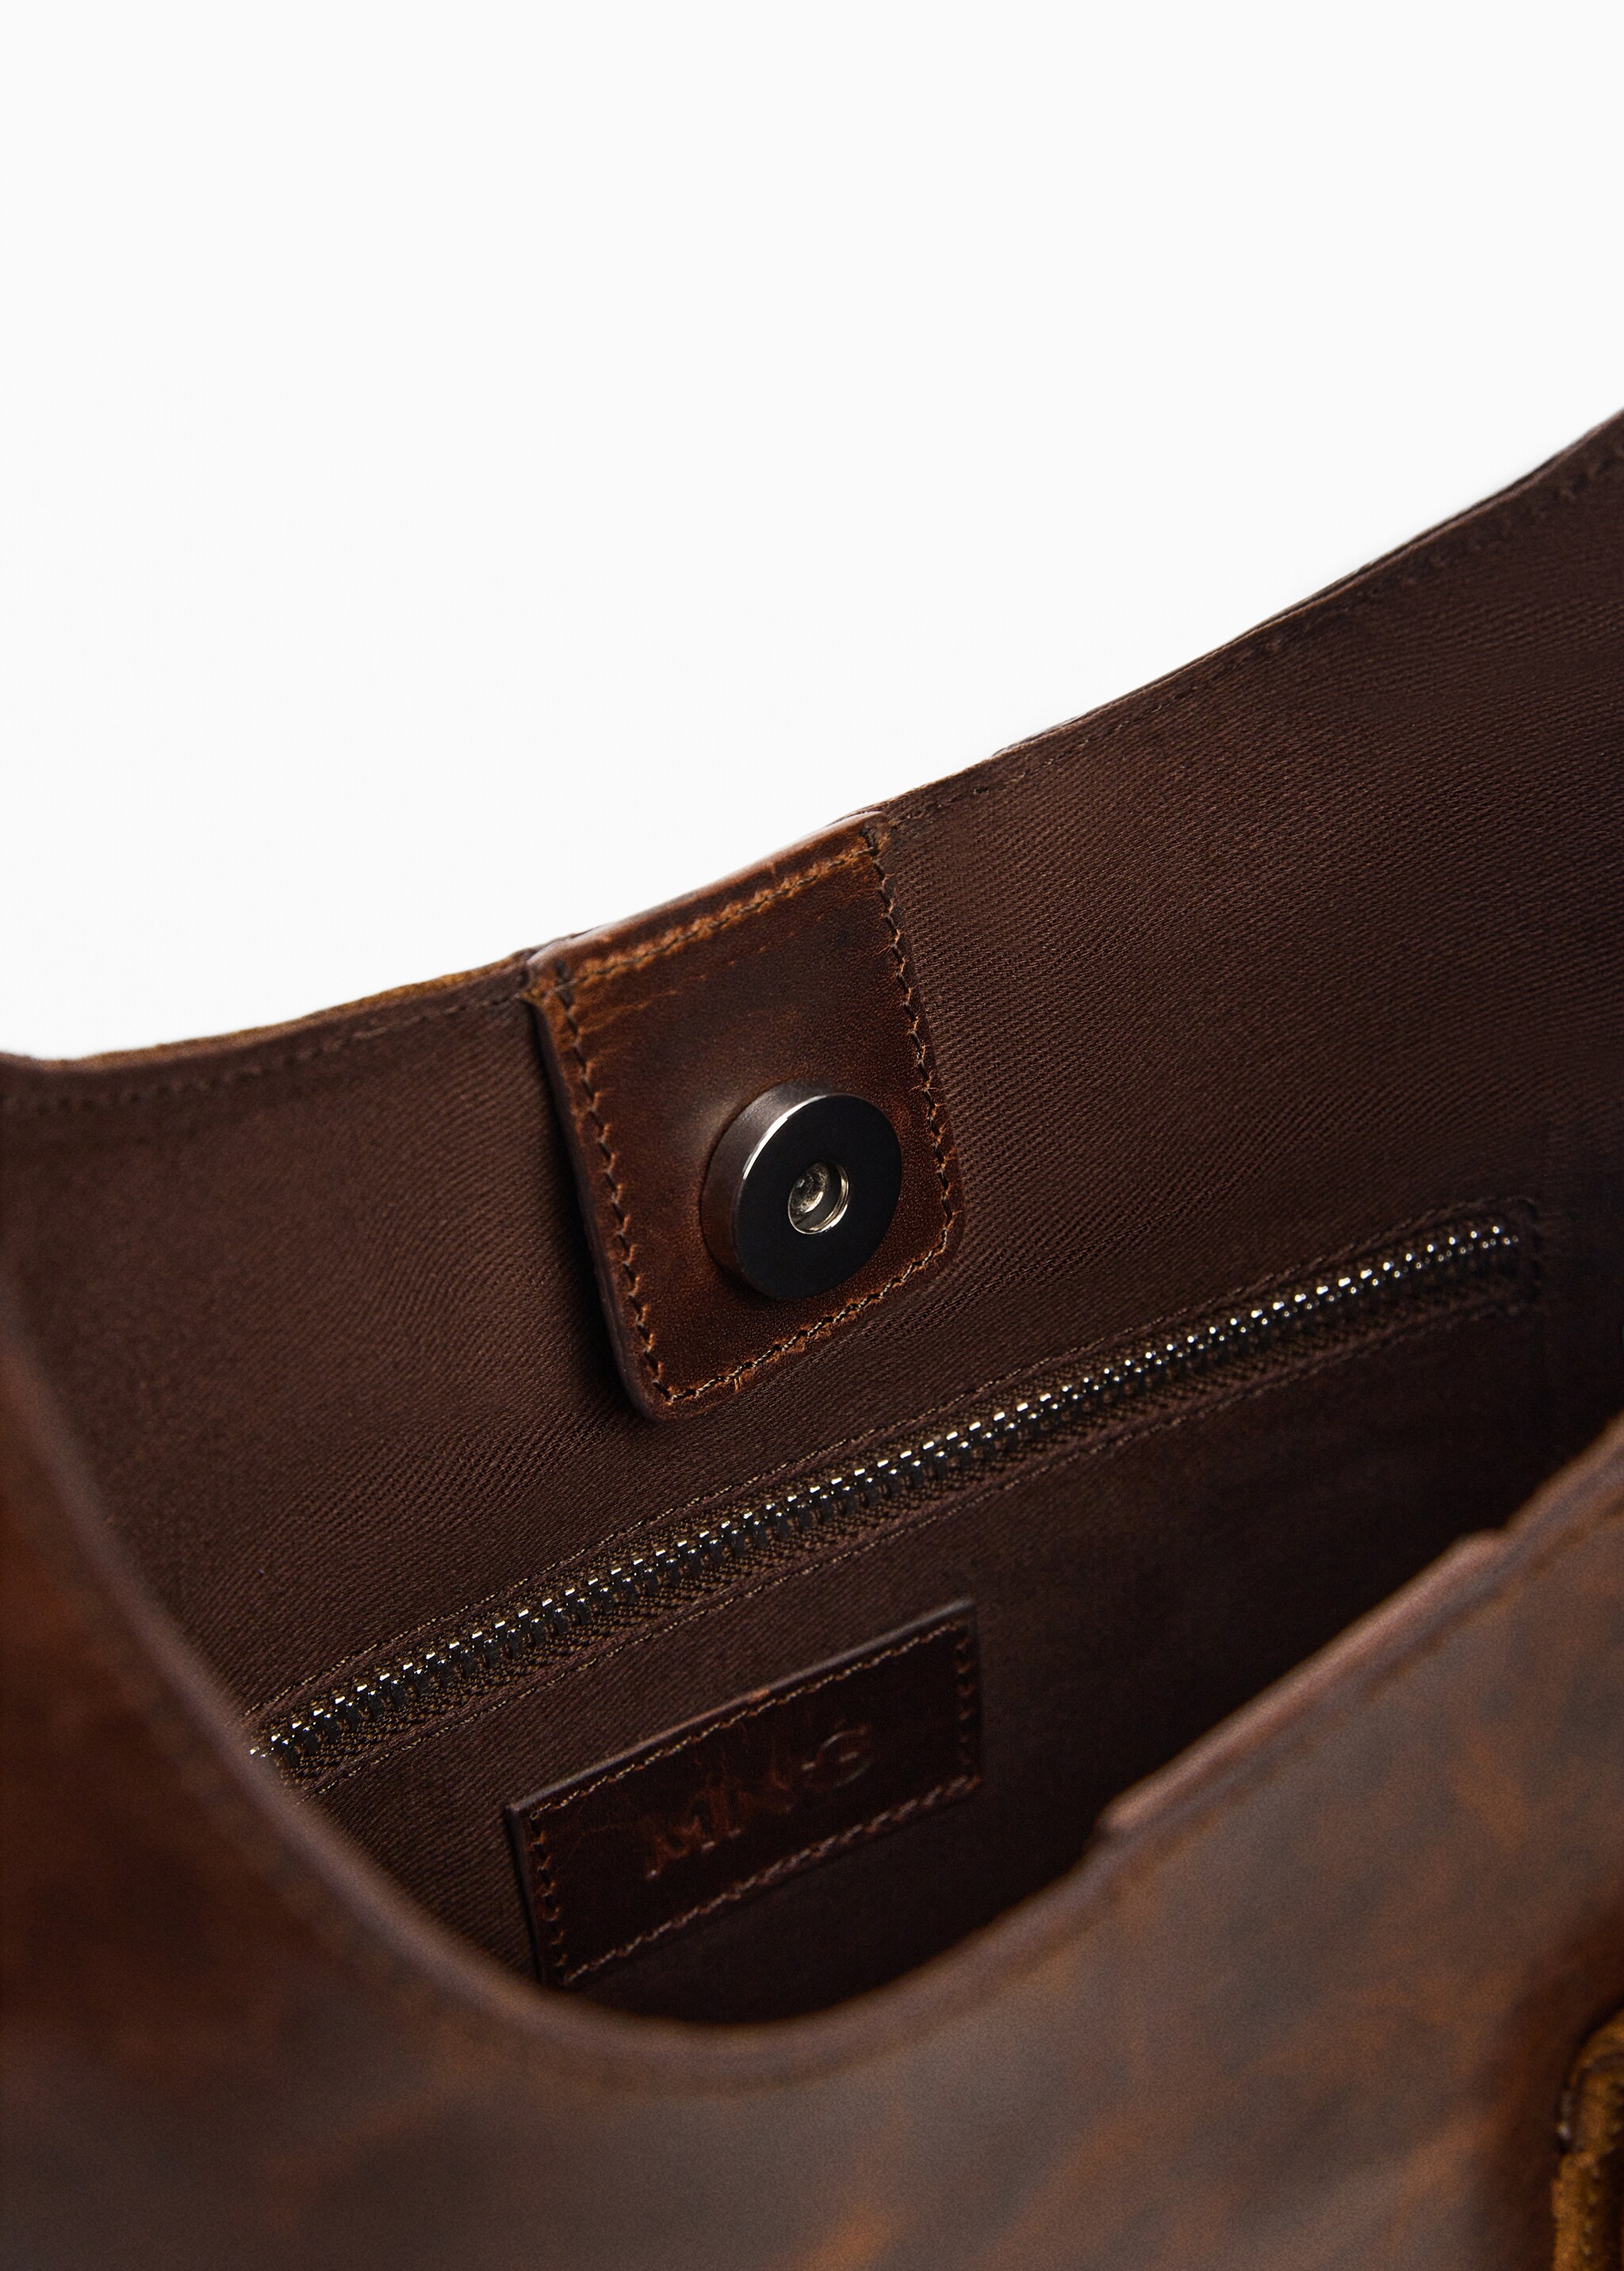 Patchwork leather bag - Details of the article 1